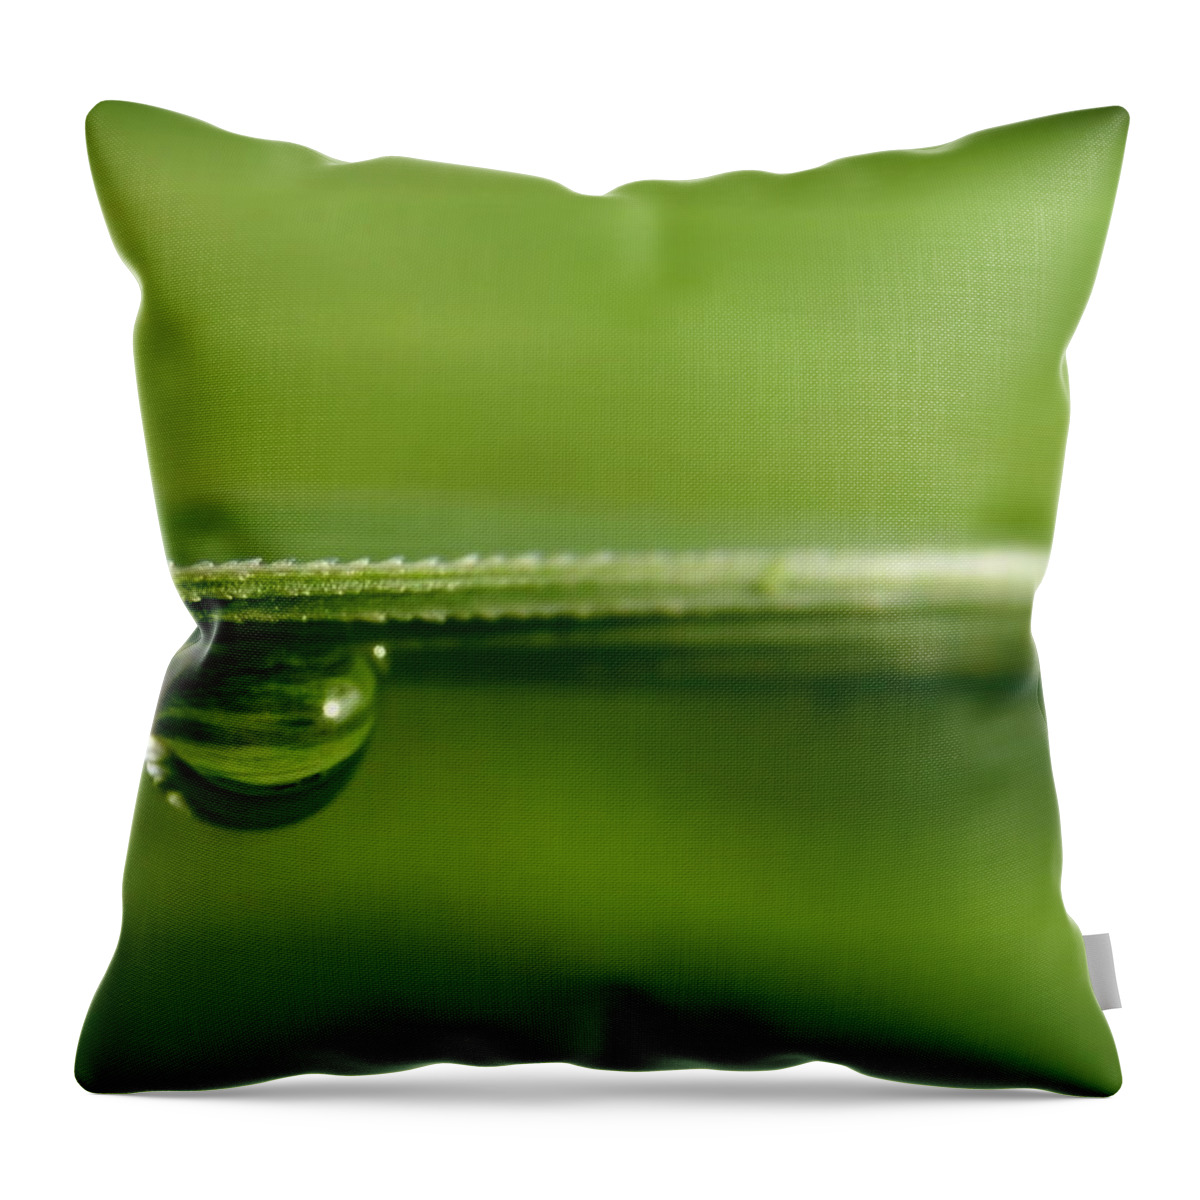 Drops Throw Pillow featuring the photograph Drops #1 by Heike Hultsch